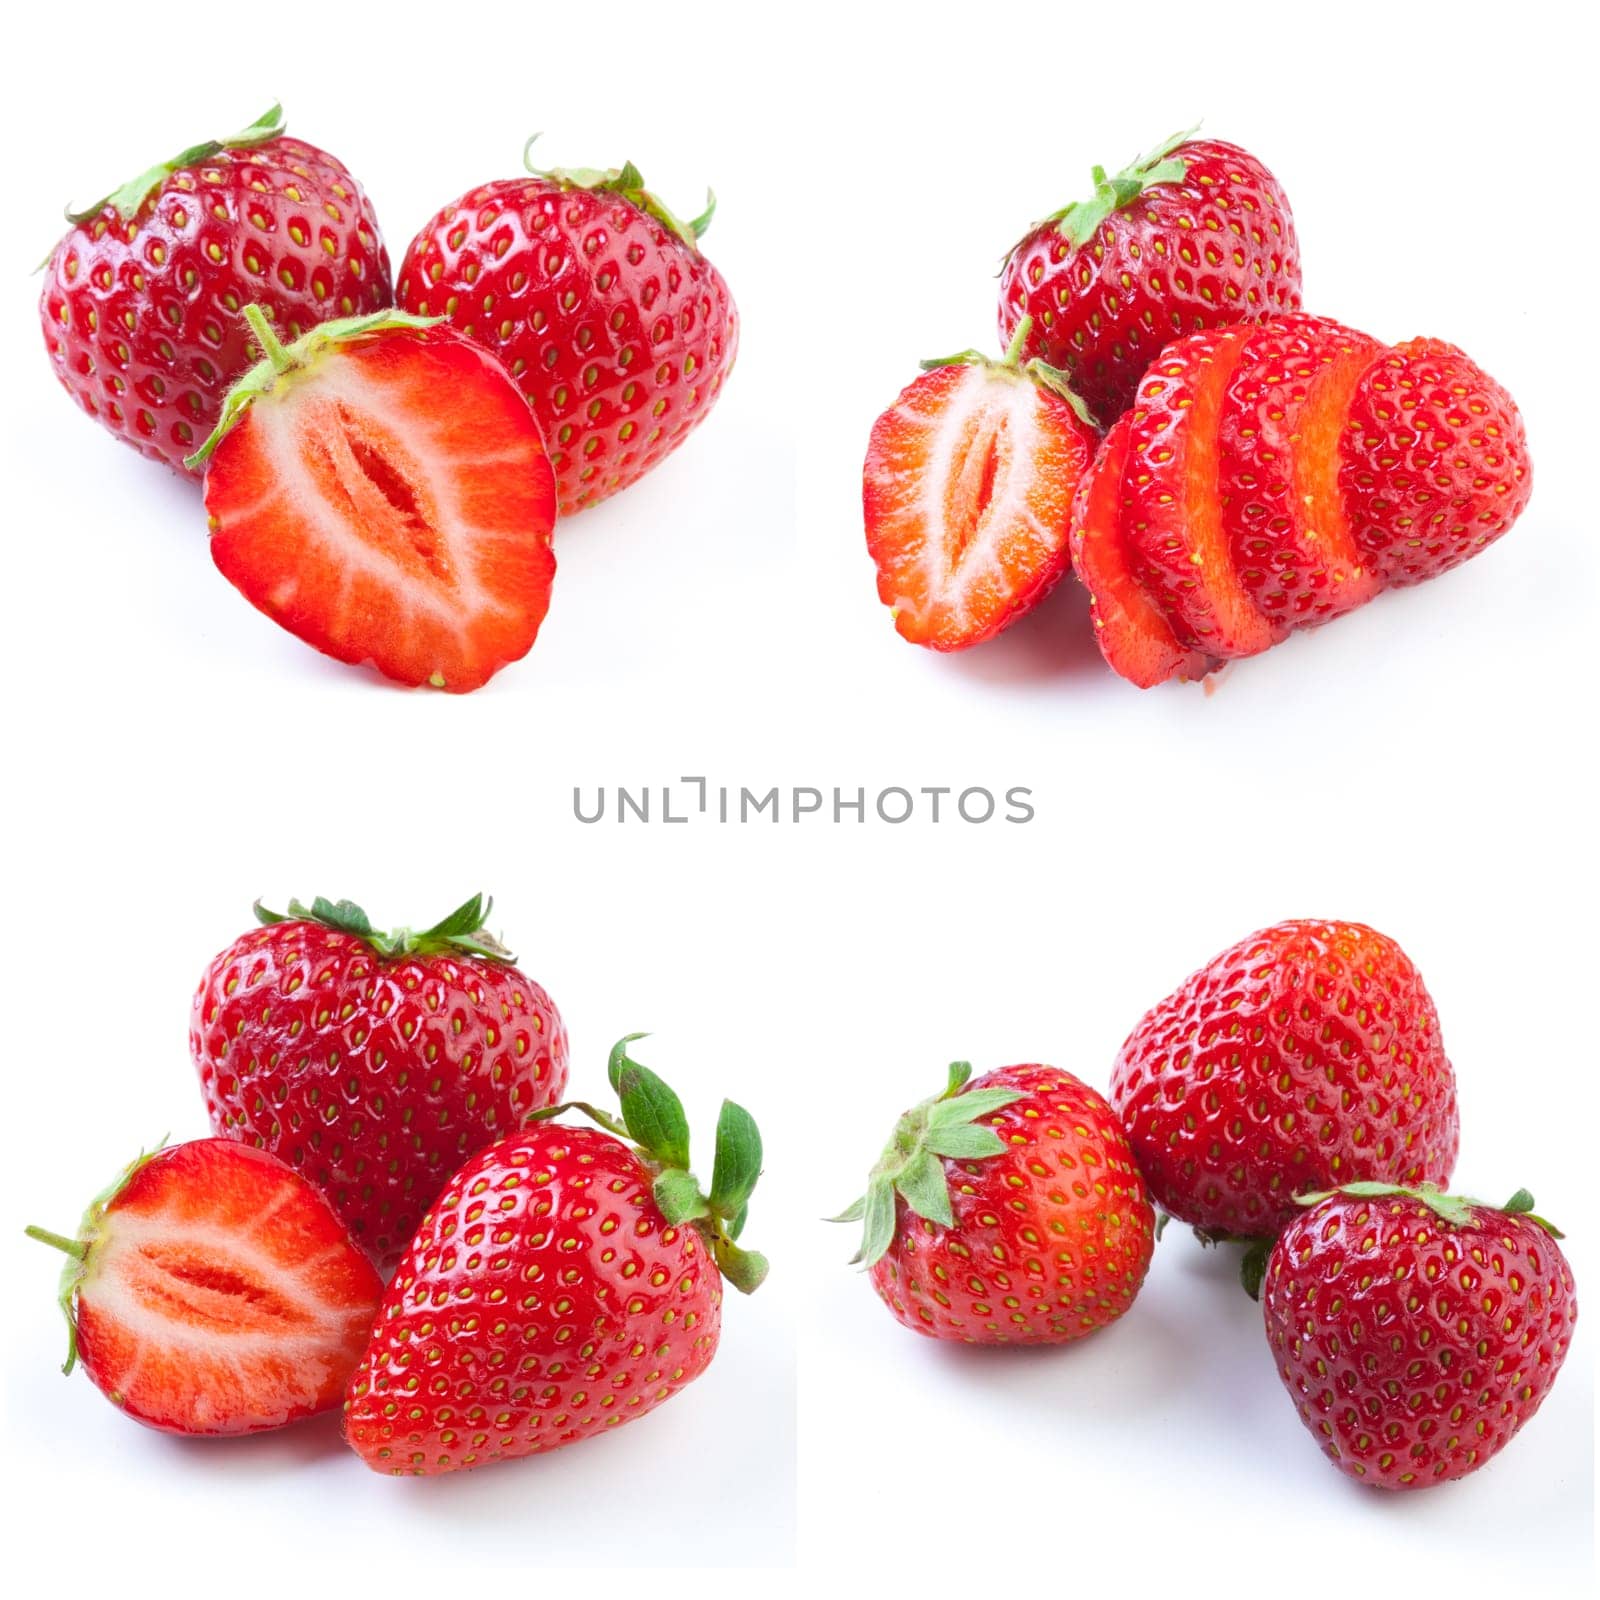 Collage of strawberries by Fabrikasimf